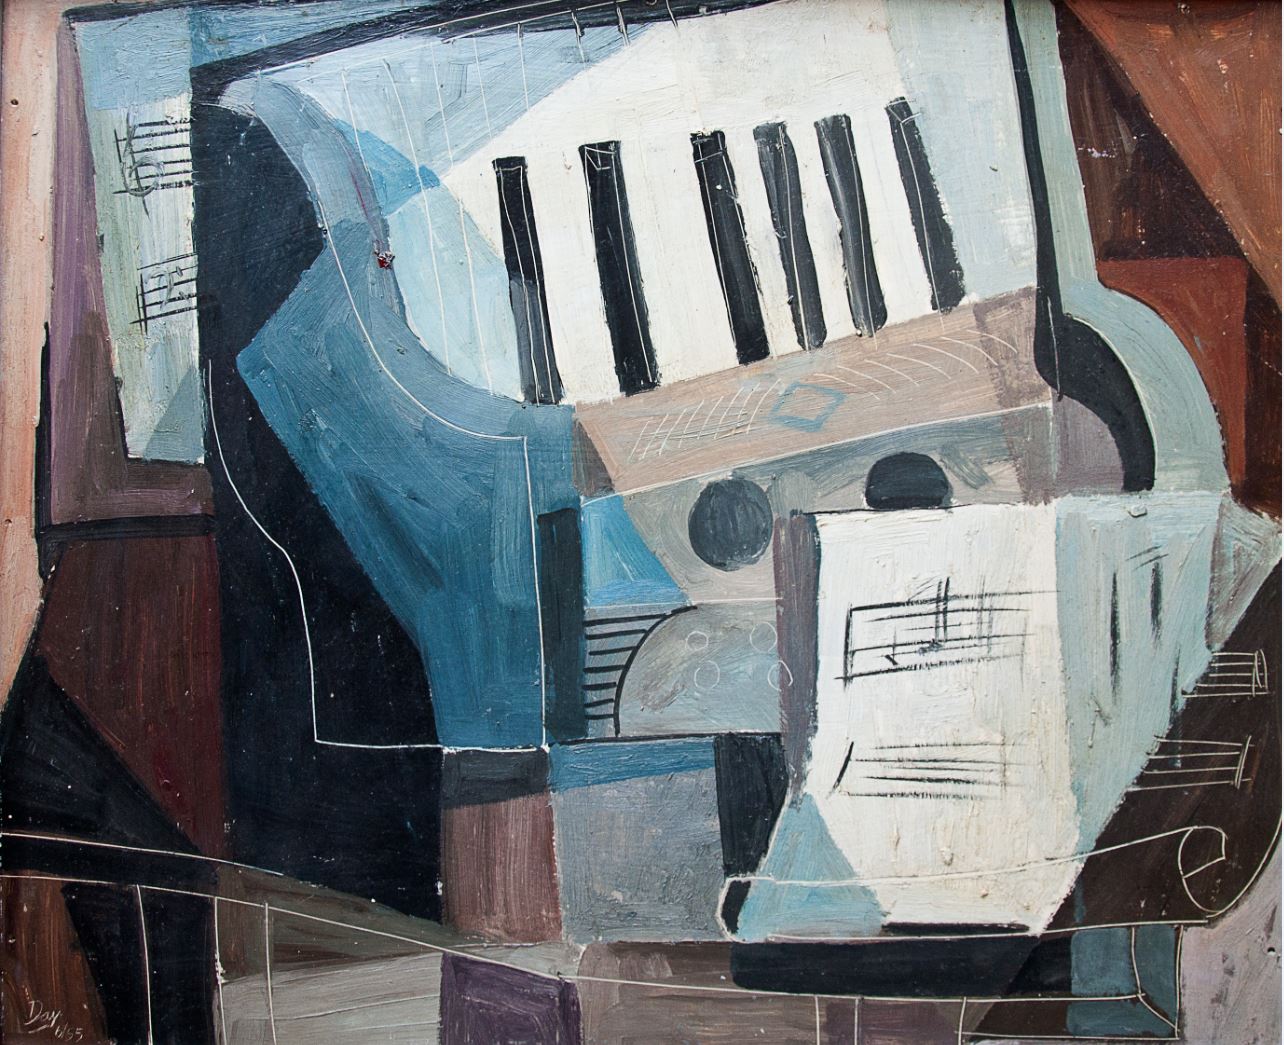 "Piano Accordion 1955 by Melvin Day"